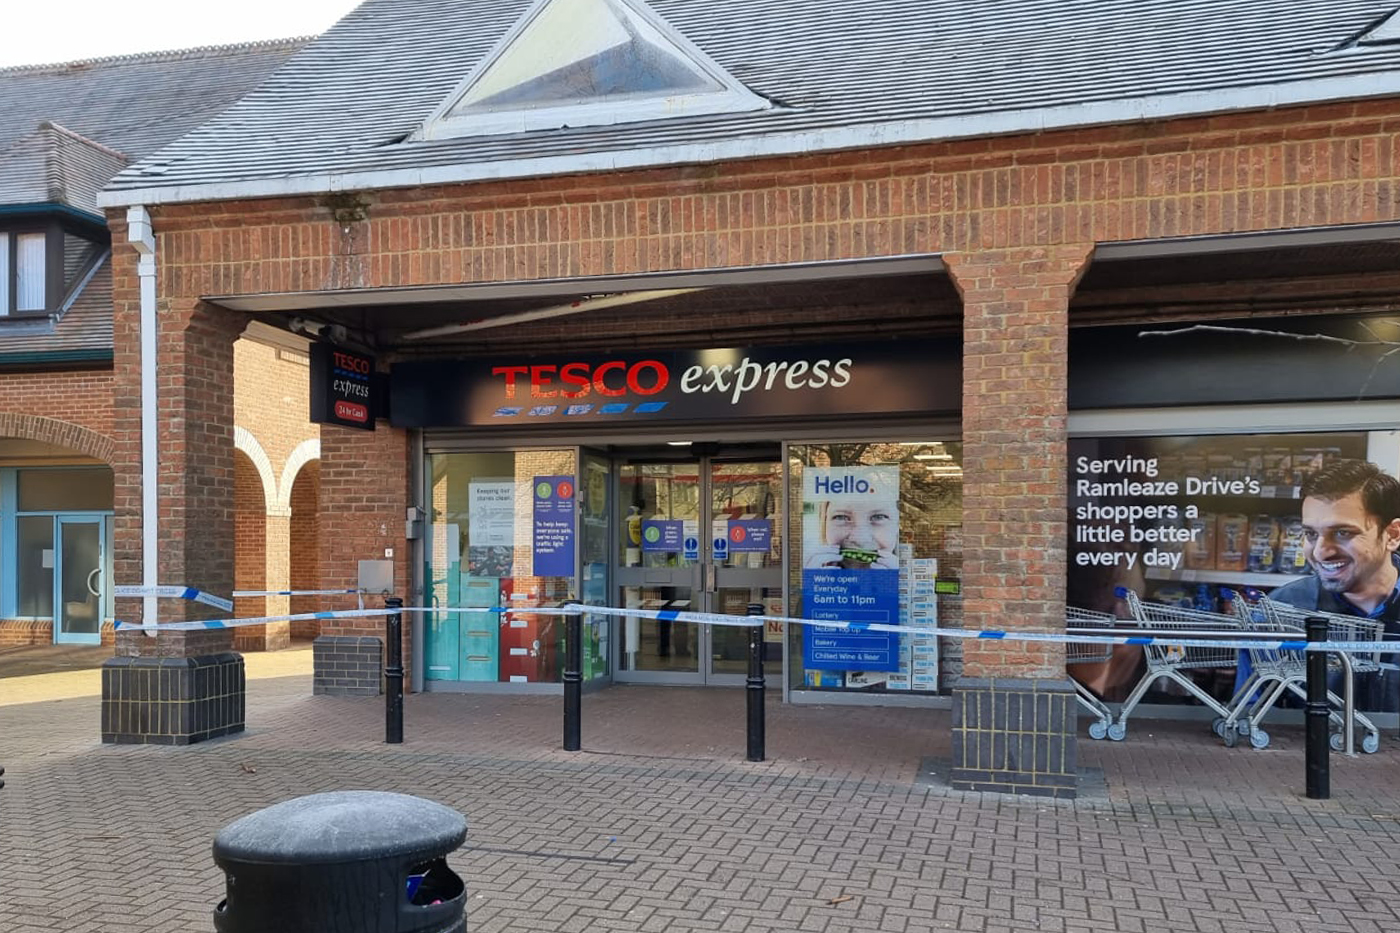 Tesco in Swindon cordoned off as crime scene after 'early morning robbery'